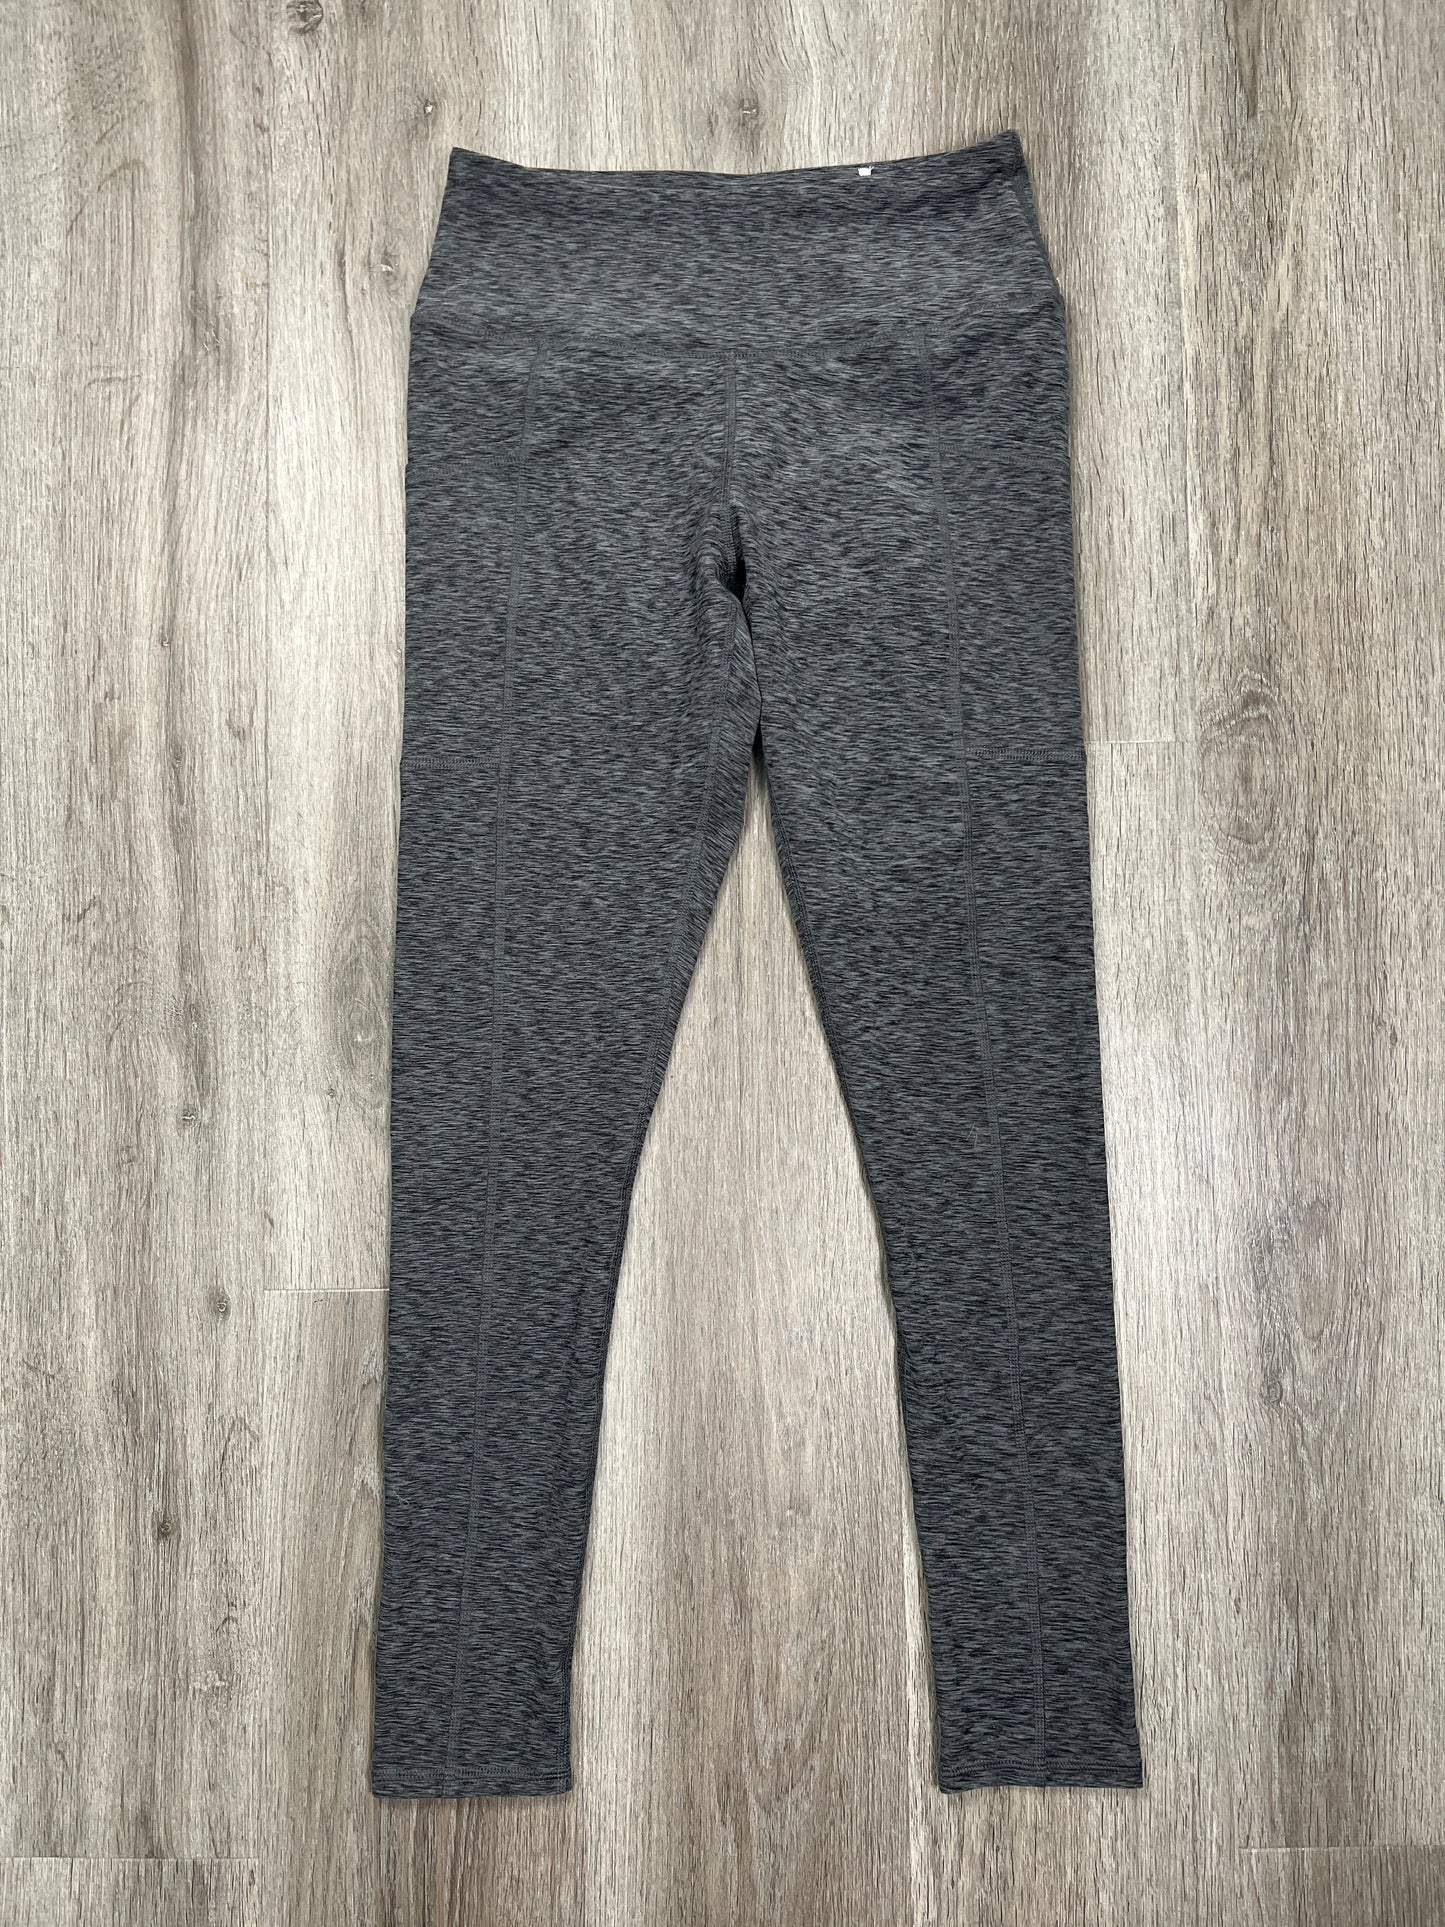 Grey Athletic Leggings Maurices, Size S